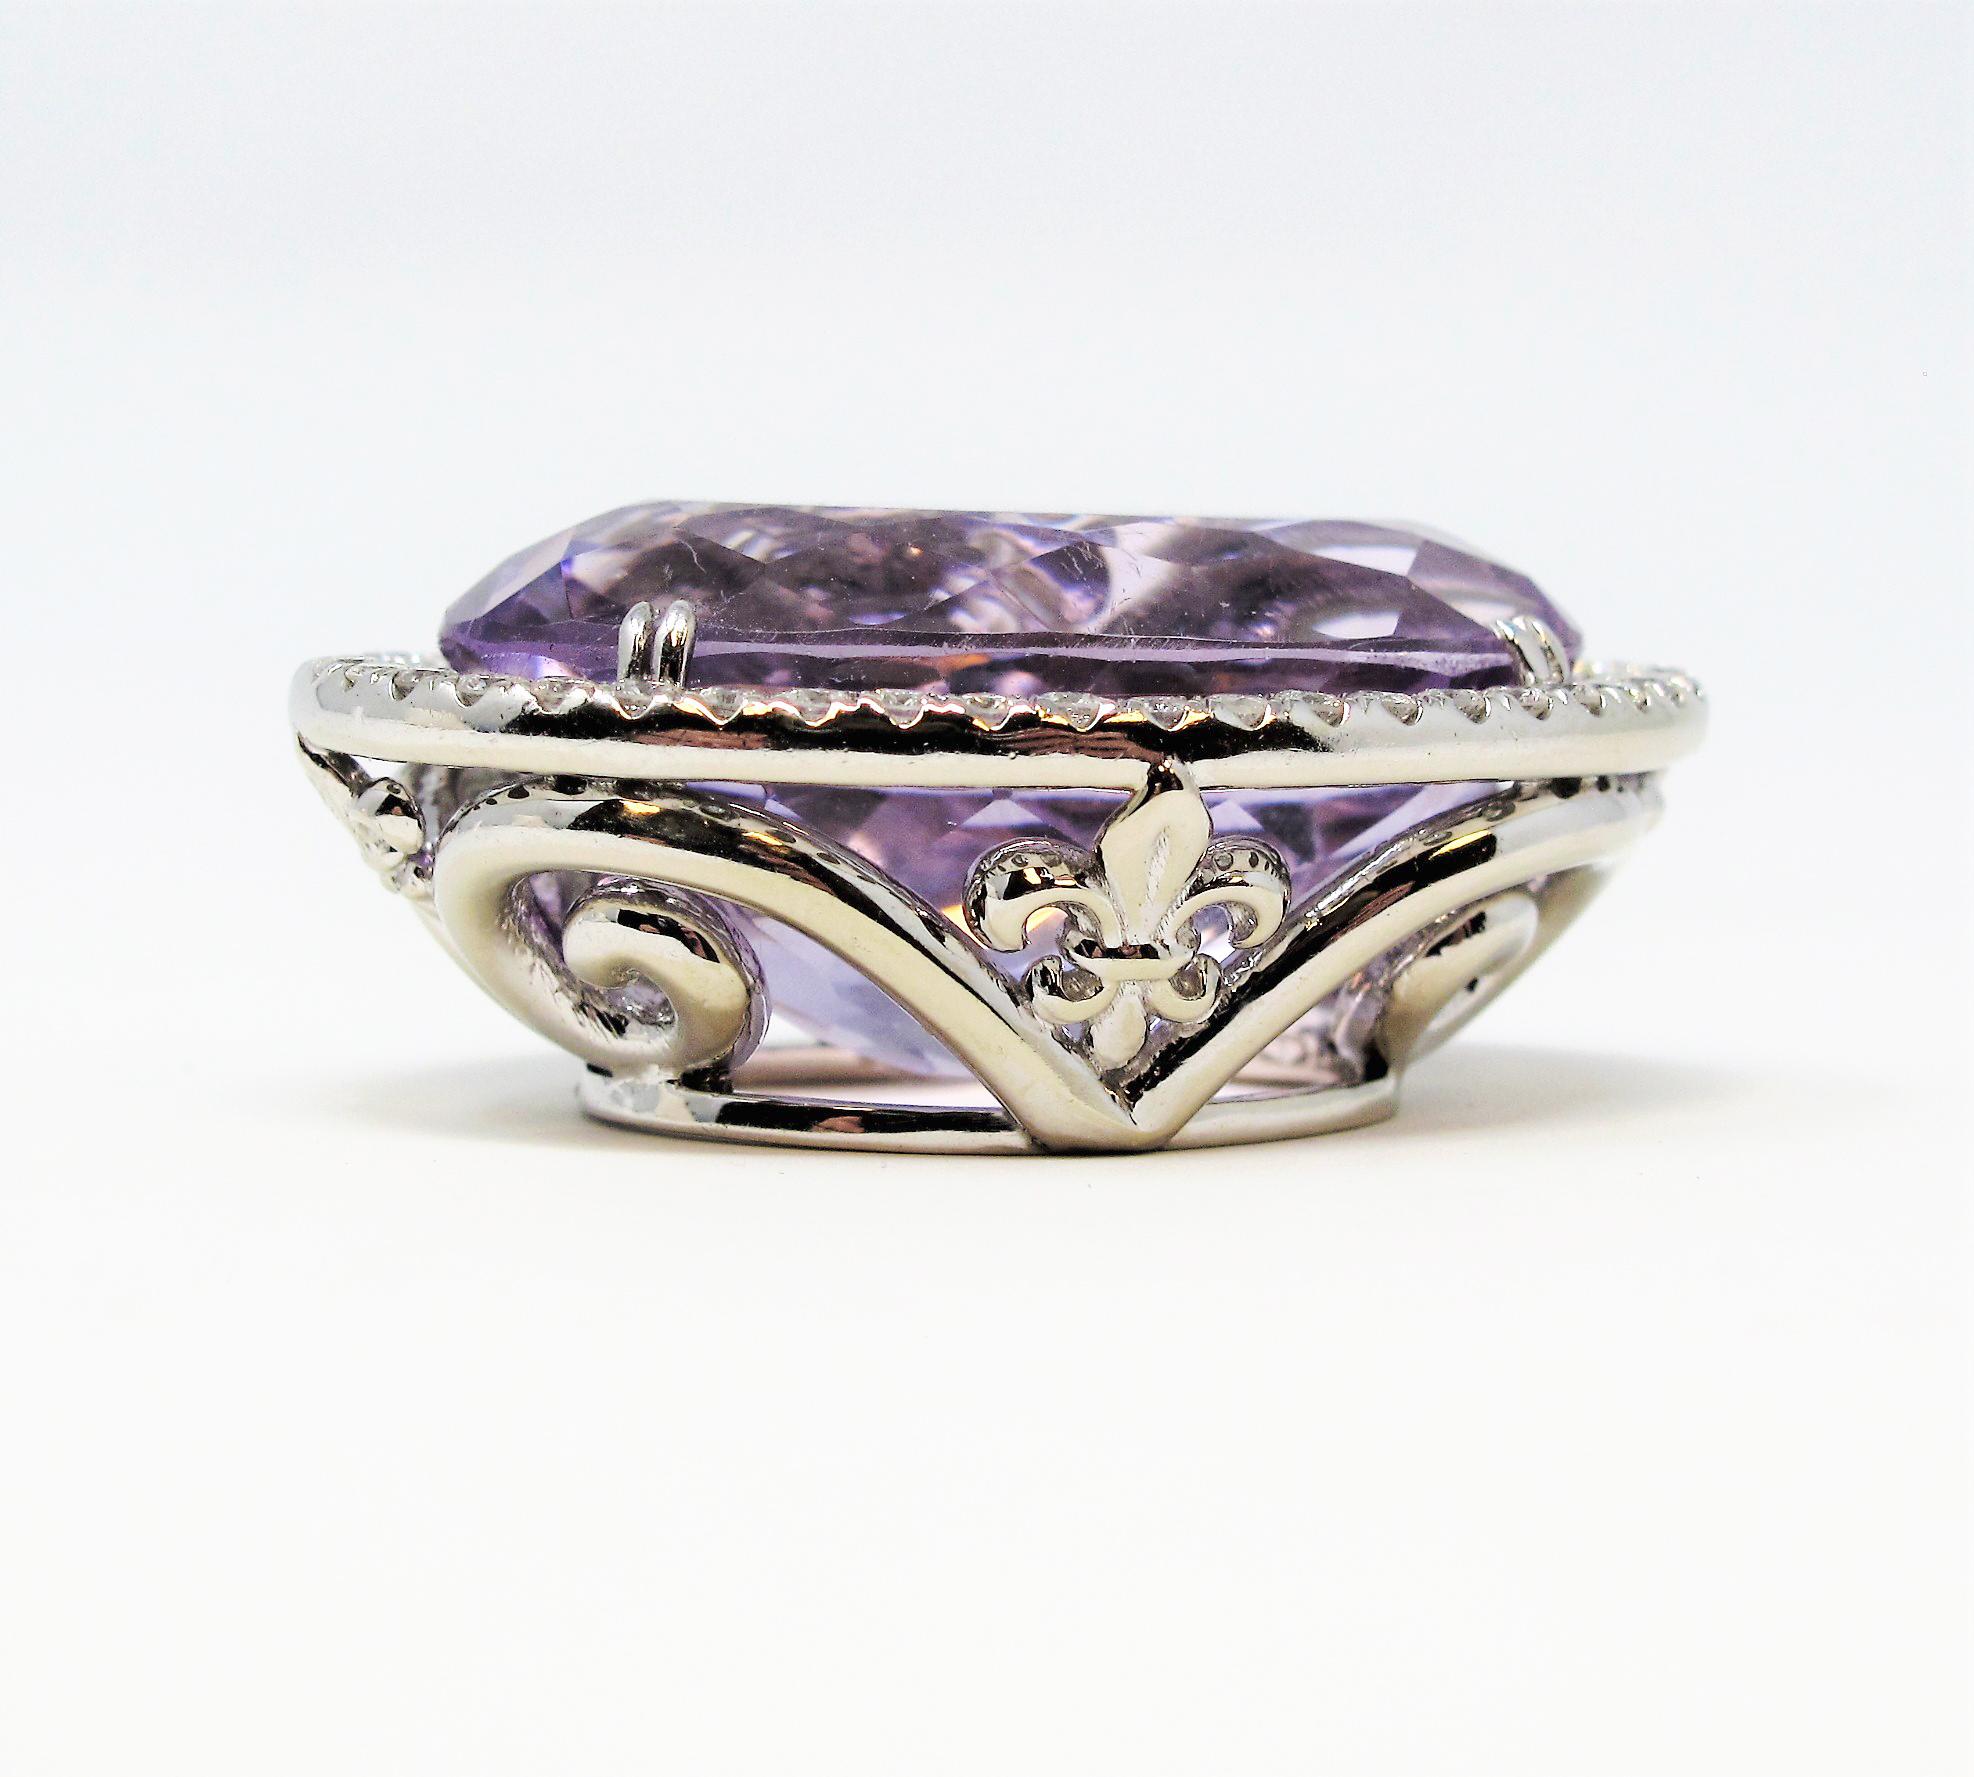 Unbelievably gorgeous amethyst and diamond halo pendant in 14 karat white gold. This massive statement piece shines with incredible brilliance, and although large in size, it appears soft and feminine against the neck with its lovely lavender